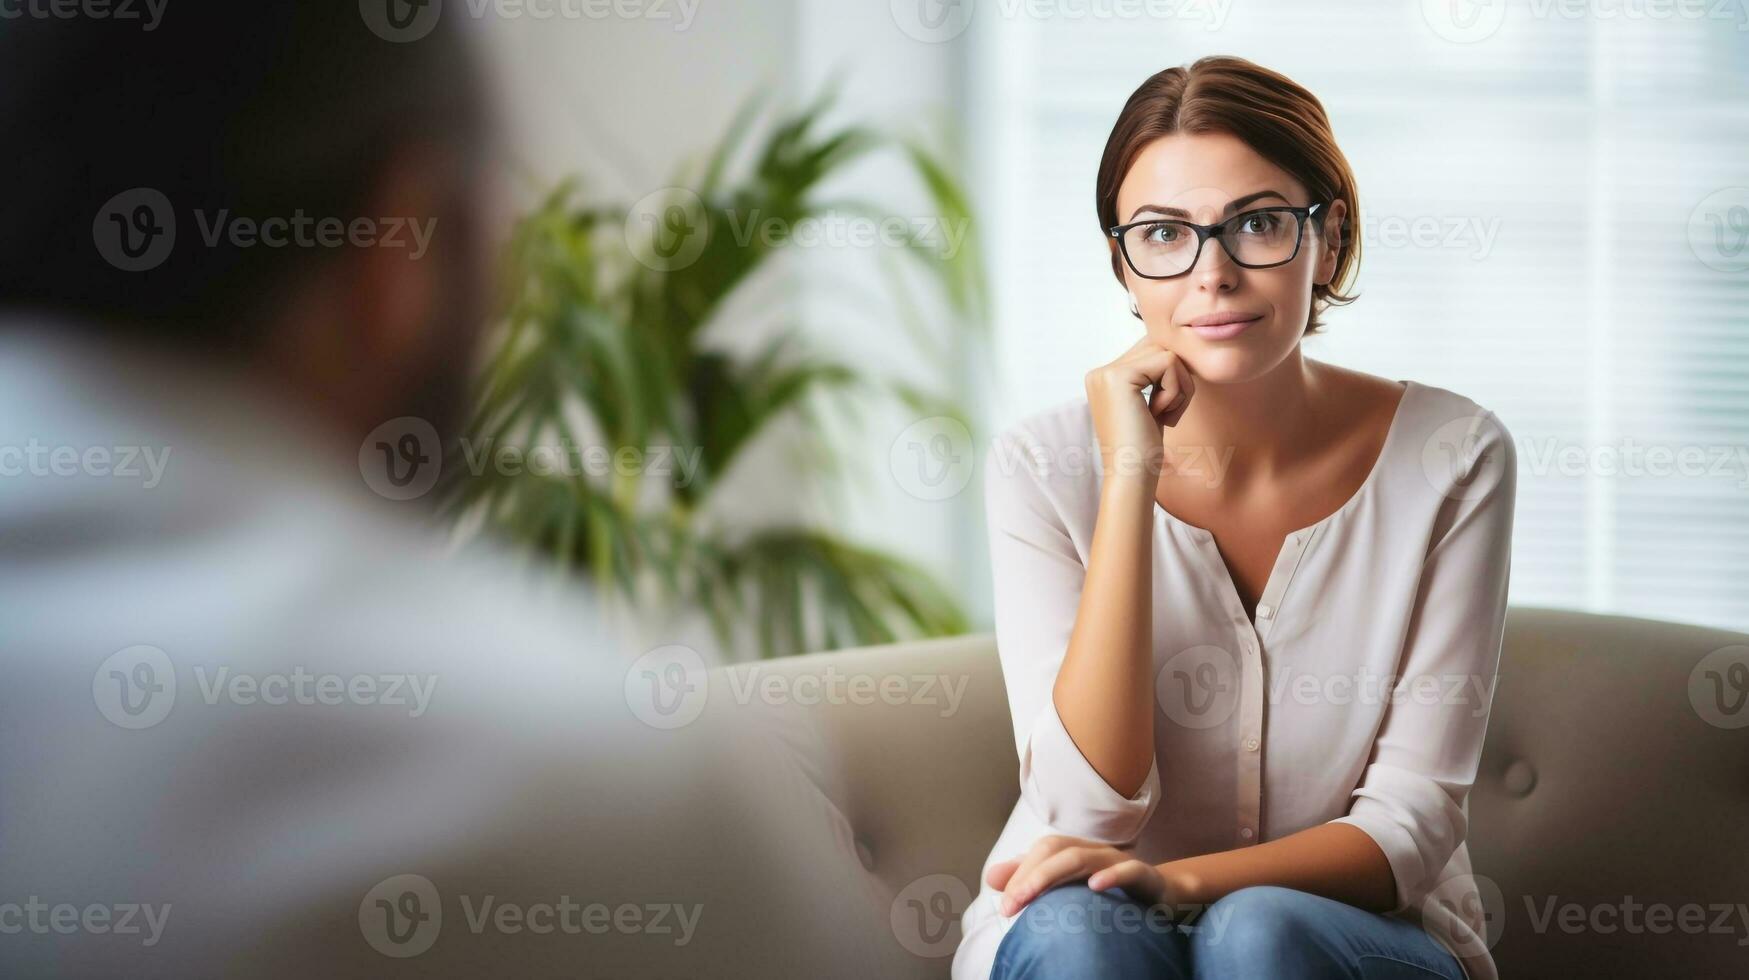 A person sitting in a therapists office, mental health images, photorealistic illustration photo